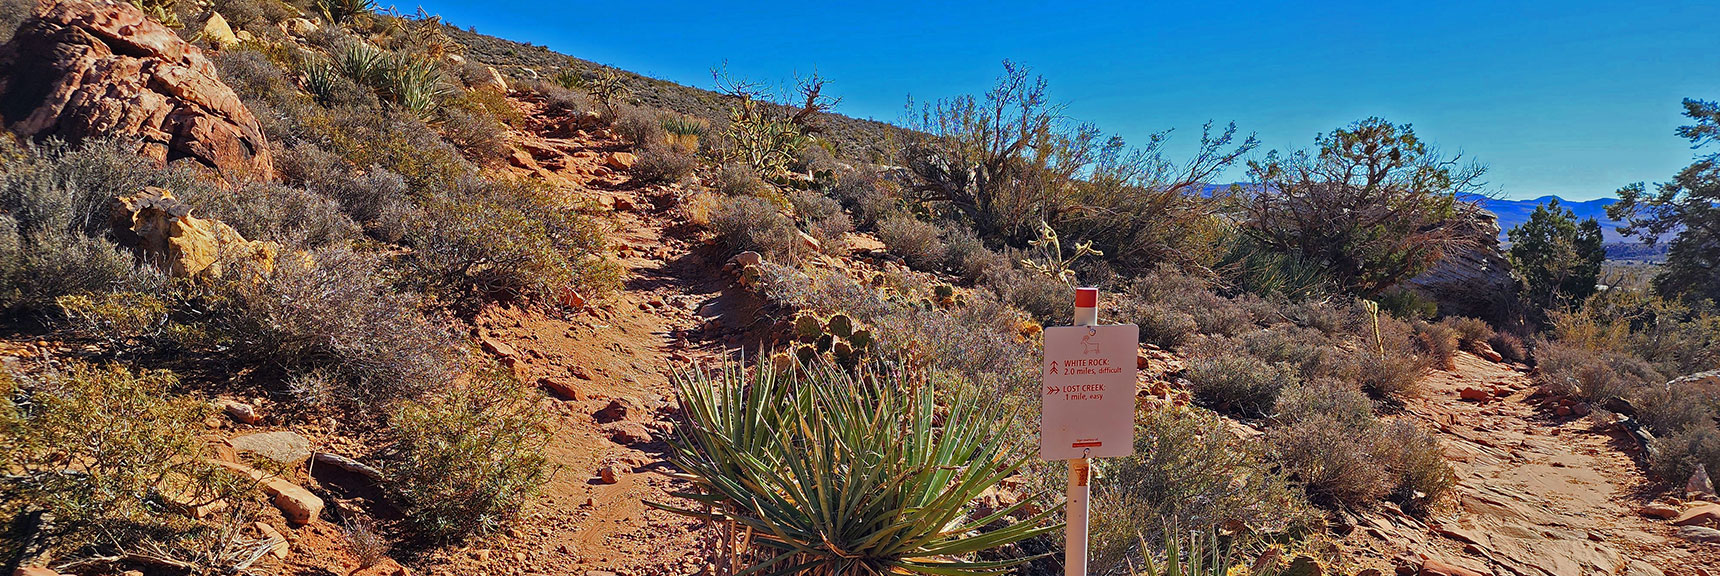 "White Rock" Sign is Only Indicator White Rock Mountain Loop Trail Turns Here | White Rock Mountain Loop Trail | Red Rock Canyon, Nevada